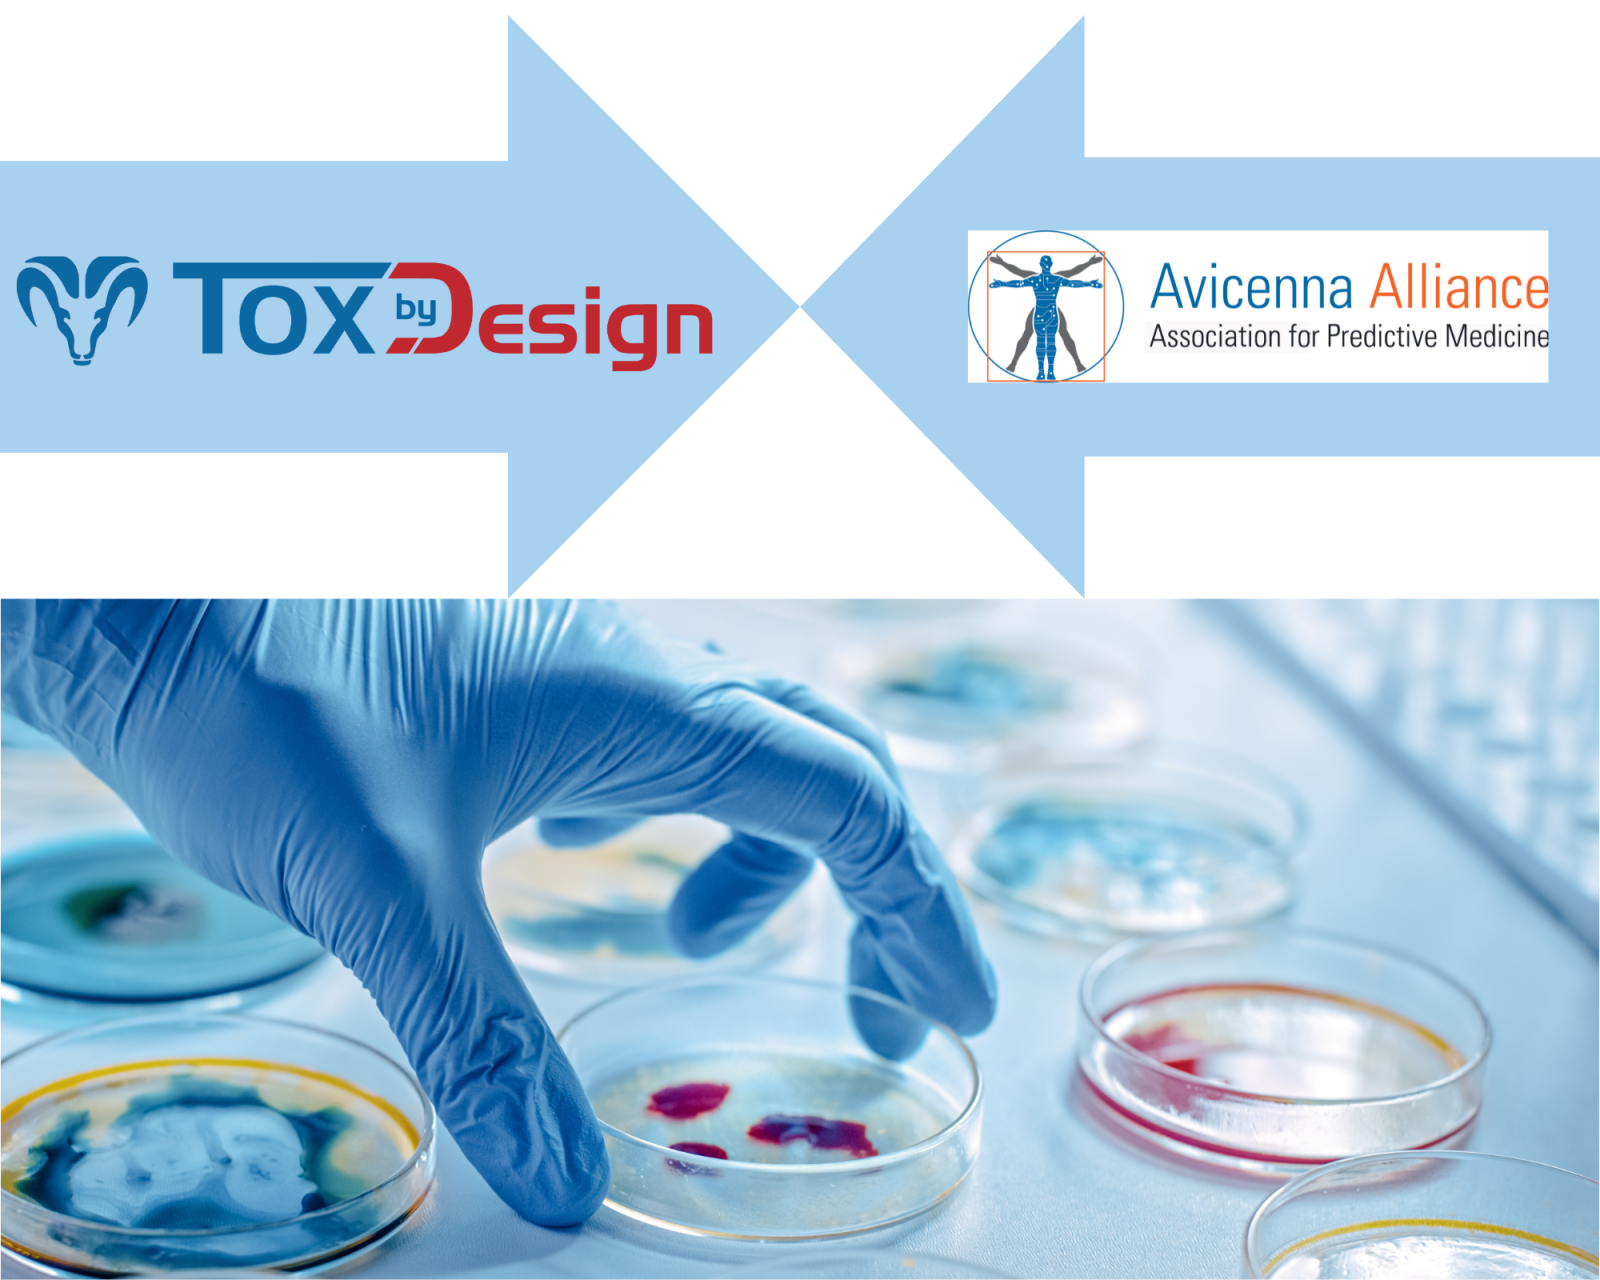 The Avicenna Alliance warmly welcomes Tox By Design into its esteemed ranks!